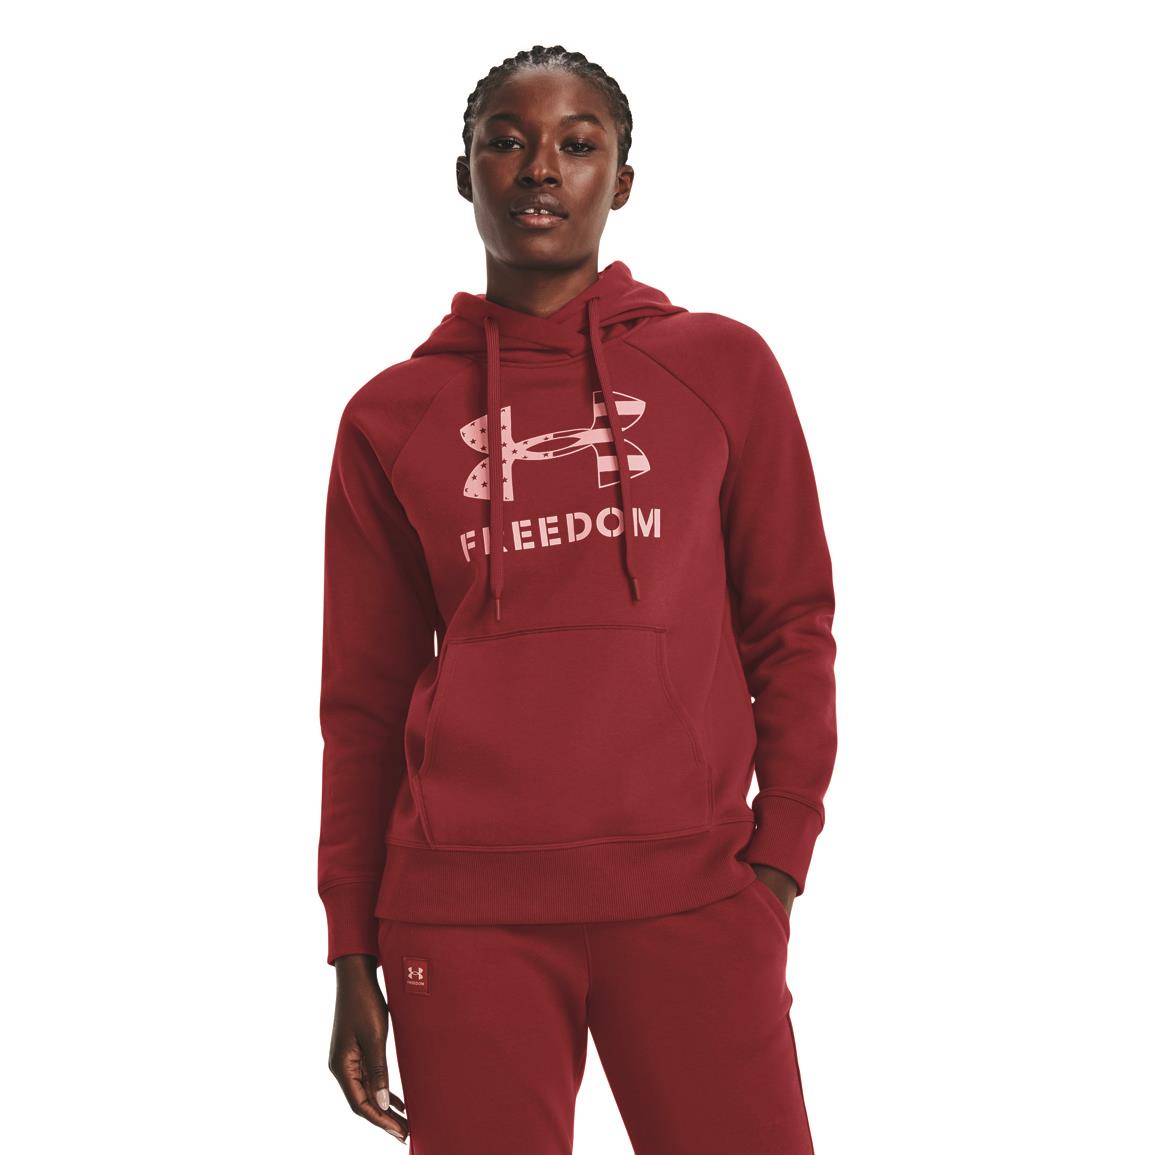 Under Armour Women's UA Freedom Rival Hoodie, Stadium Red